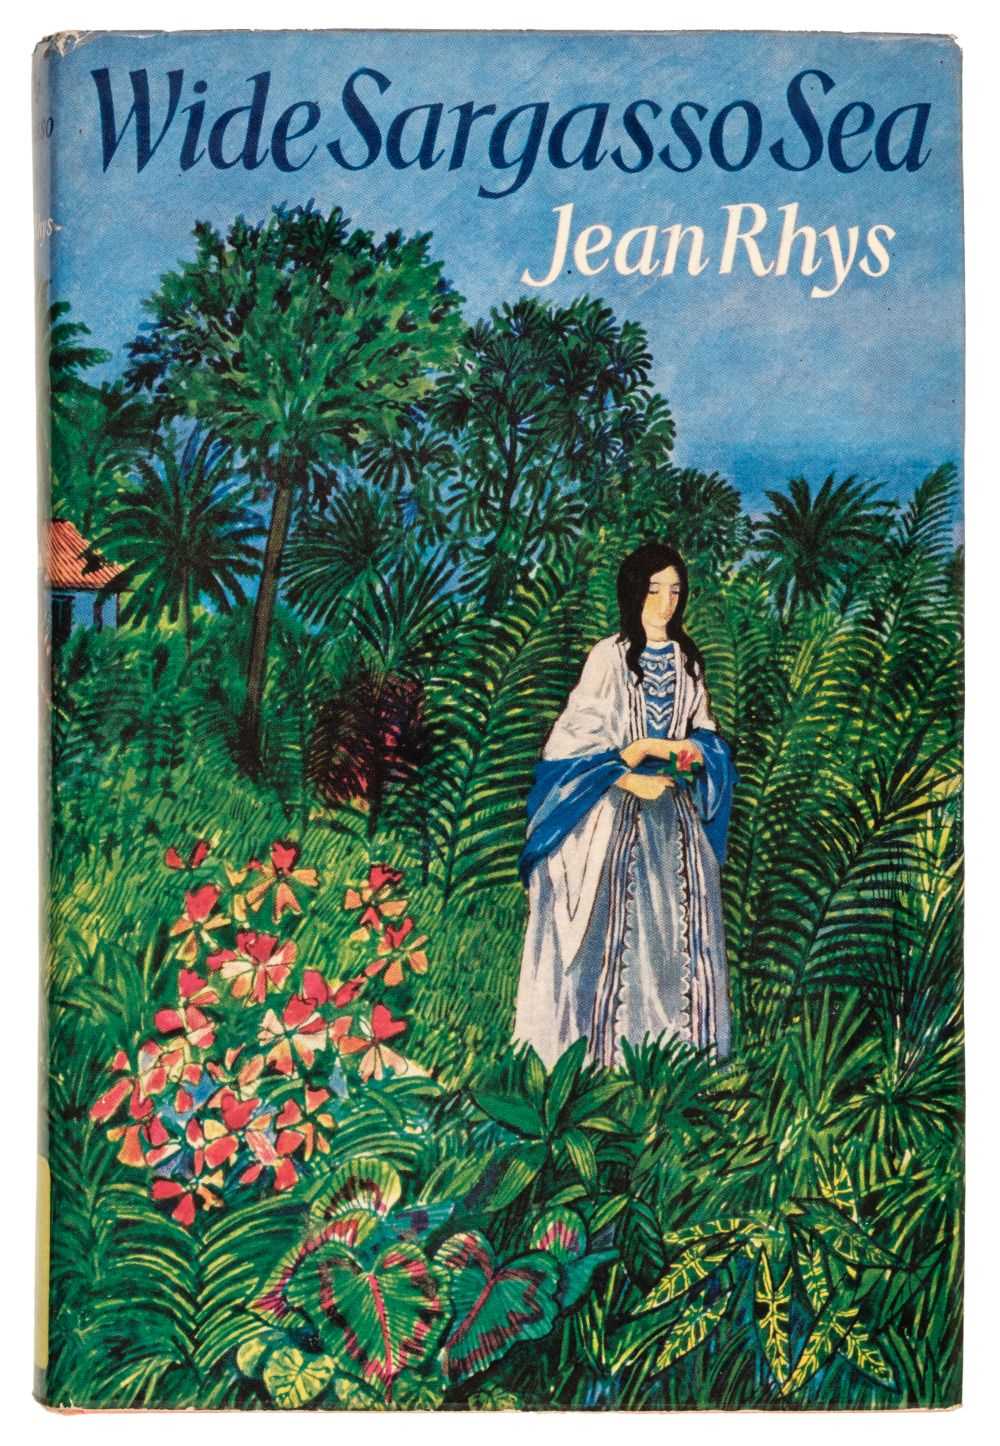 Lot 880 Rhys Jean Wide Sargasso Sea 1st Edition 